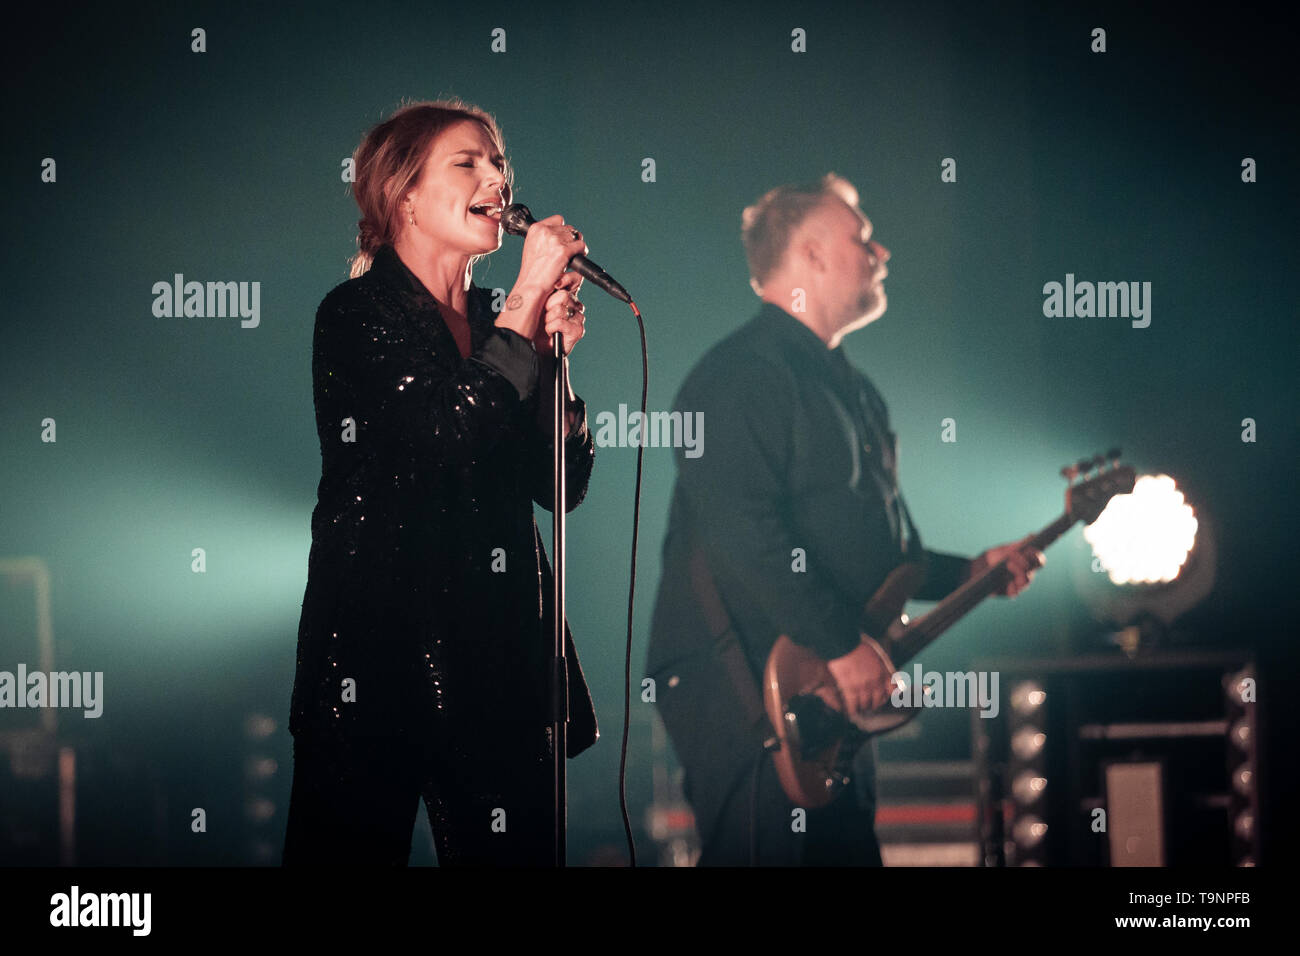 Oslo, Norway. 19th May, 2019. Norway, Oslo - May 19, 2019. The Swedish rock  band The Cardigans performs a live concert at Den Norske Opera & Ballett in  Oslo. Here singer Nina